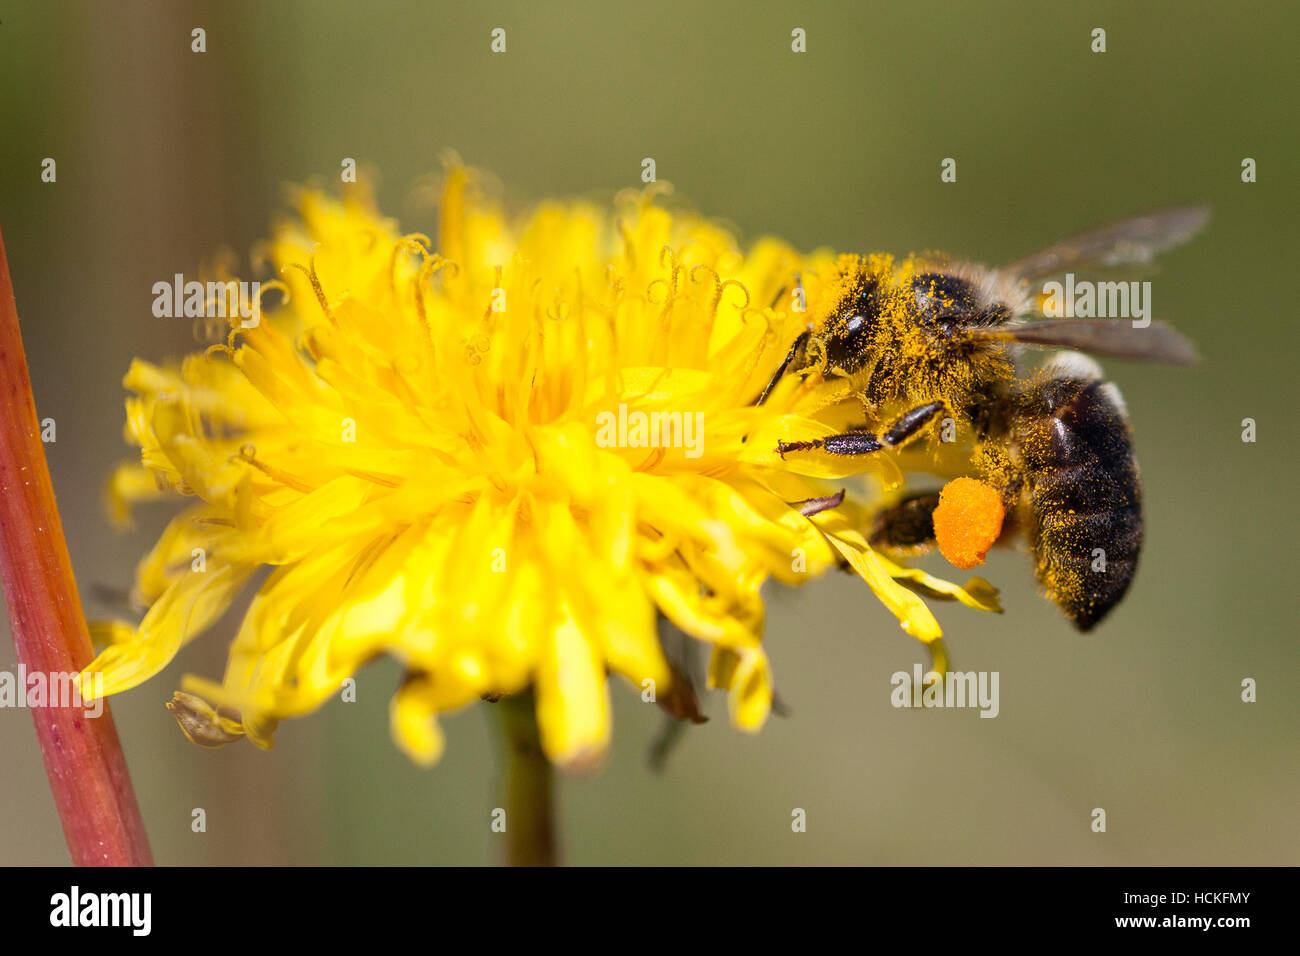 Bee perched on a flower collecting pollen Stock Photo